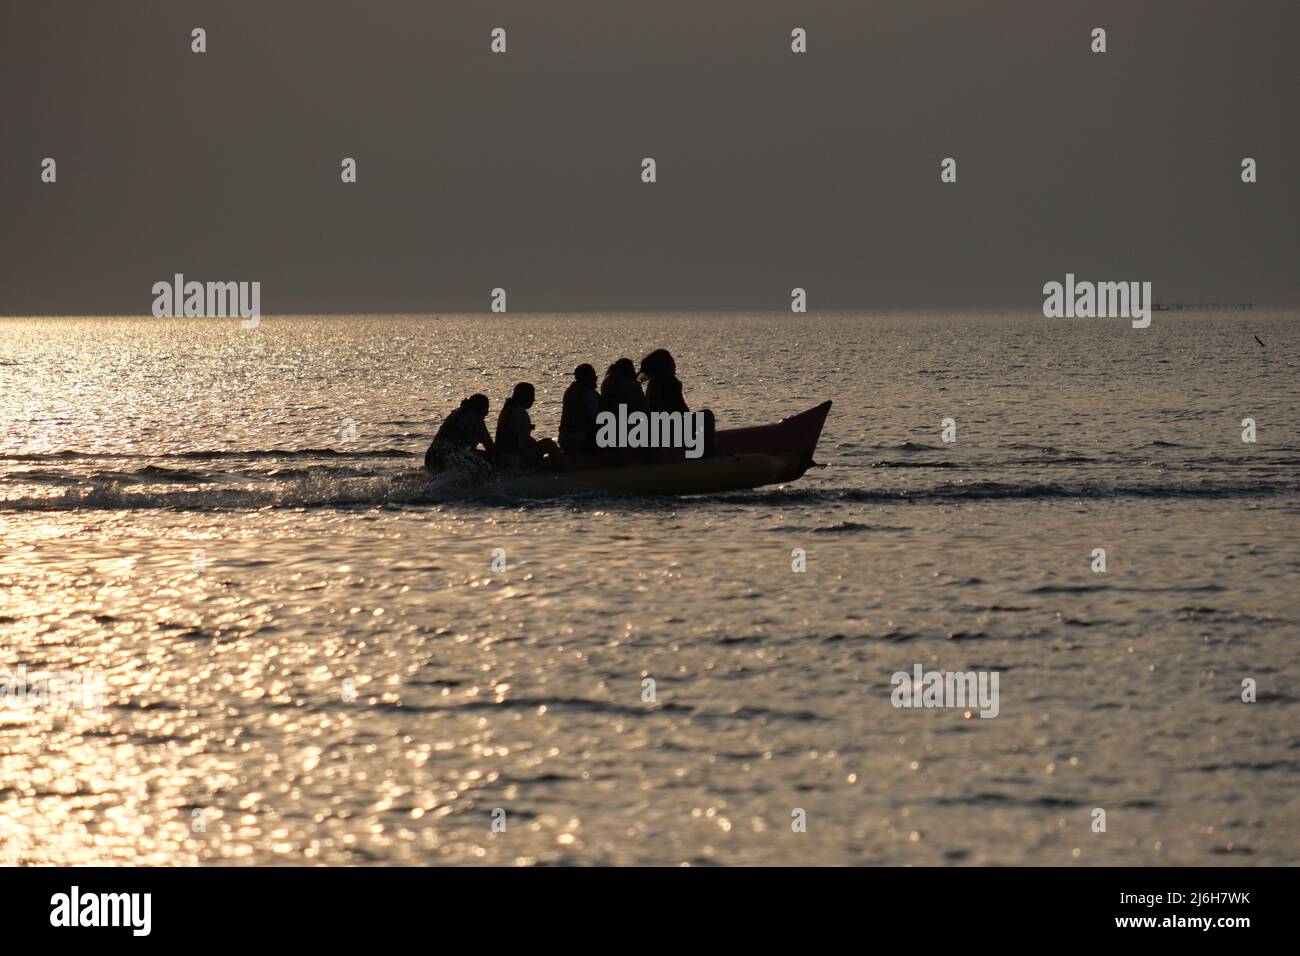 A group of excited tourist is riding a banana boat over brightly lit sea Stock Photo